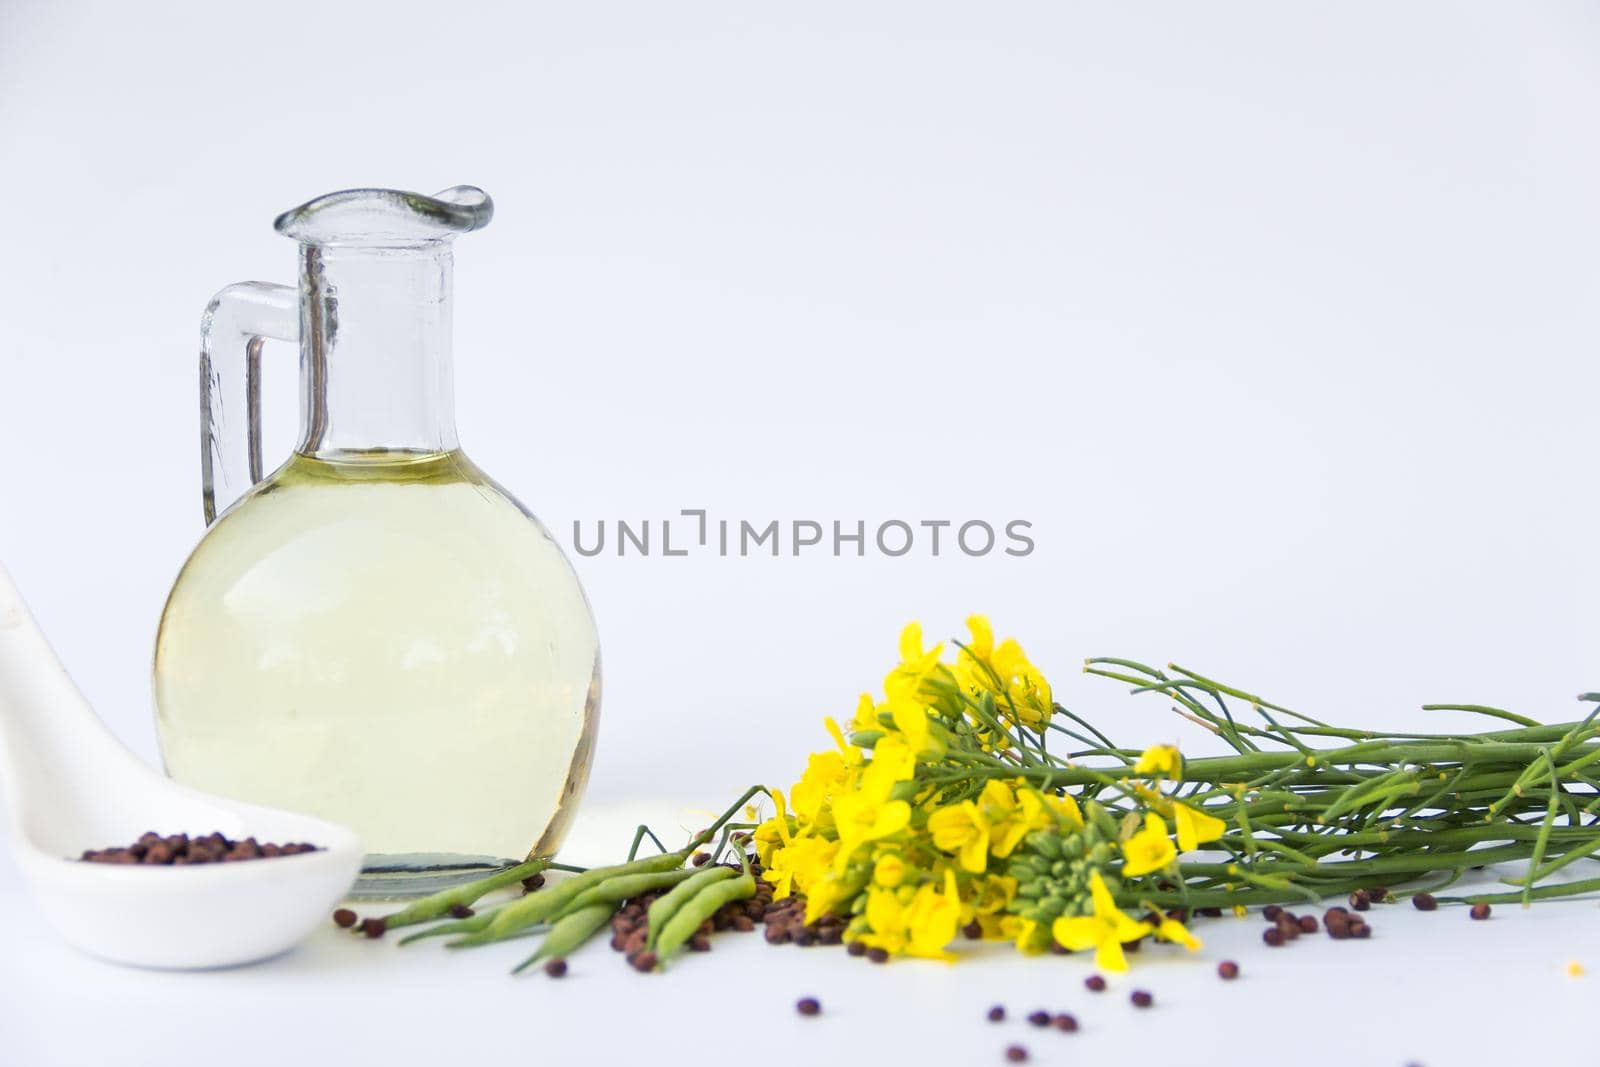 bottle rapeseed oil seeds and flowers on white background